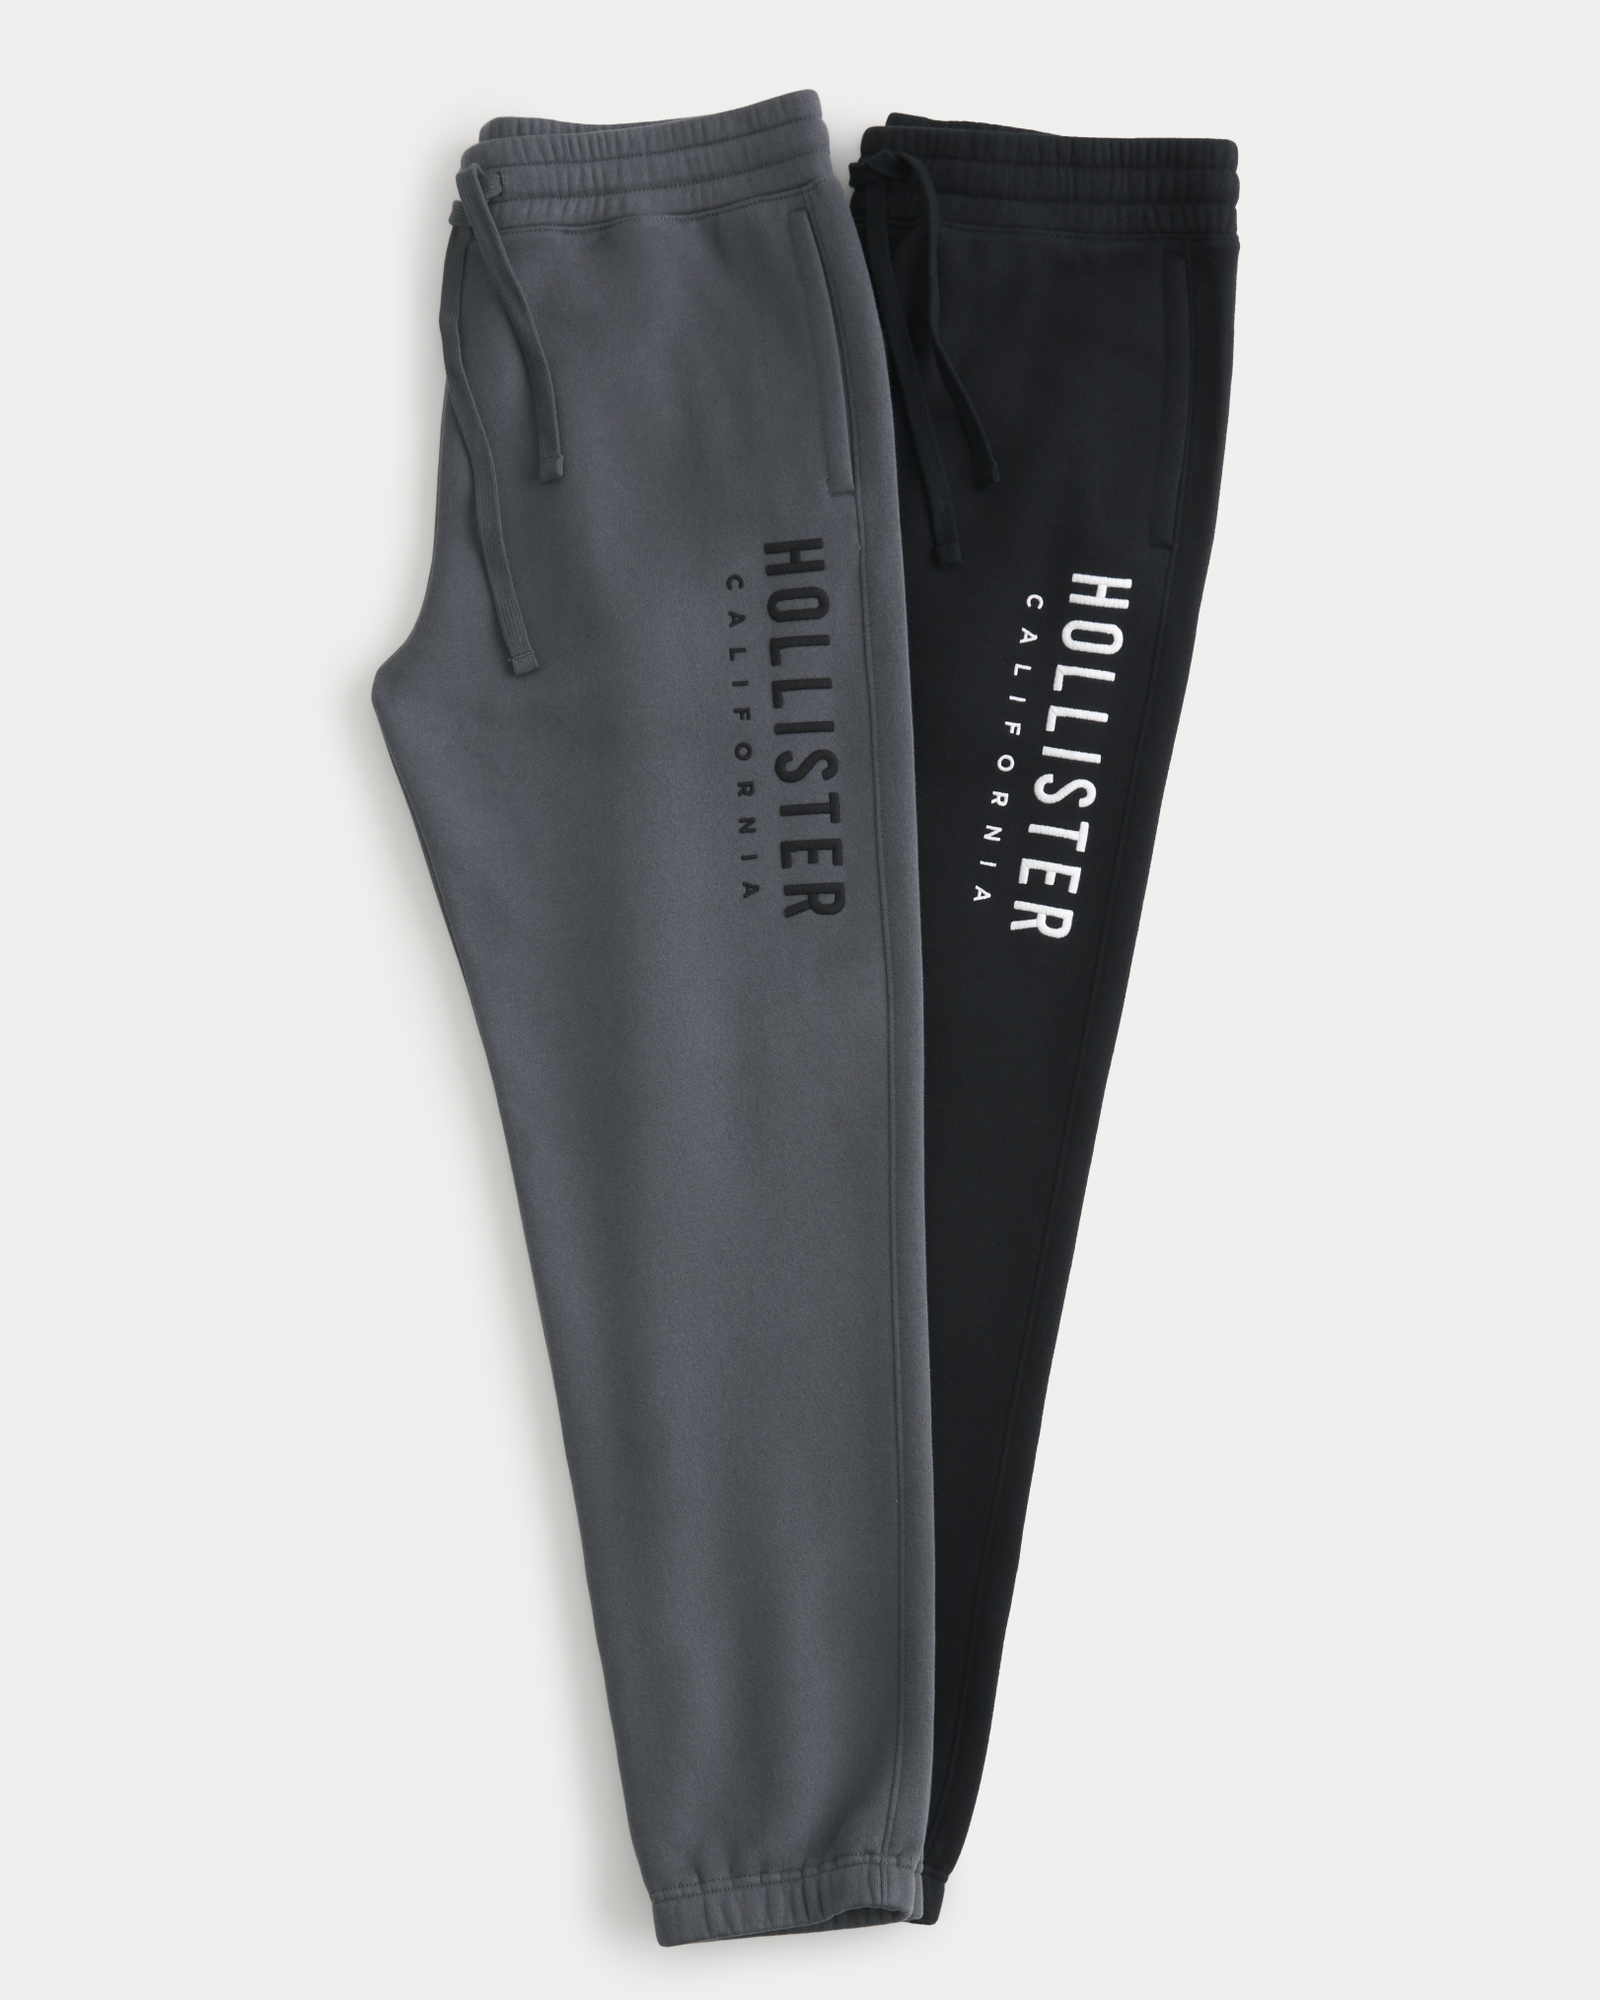 https://img.hollisterco.com/is/image/anf/KIC_334-4005-0001-900_prod1.jpg?policy=product-extra-large